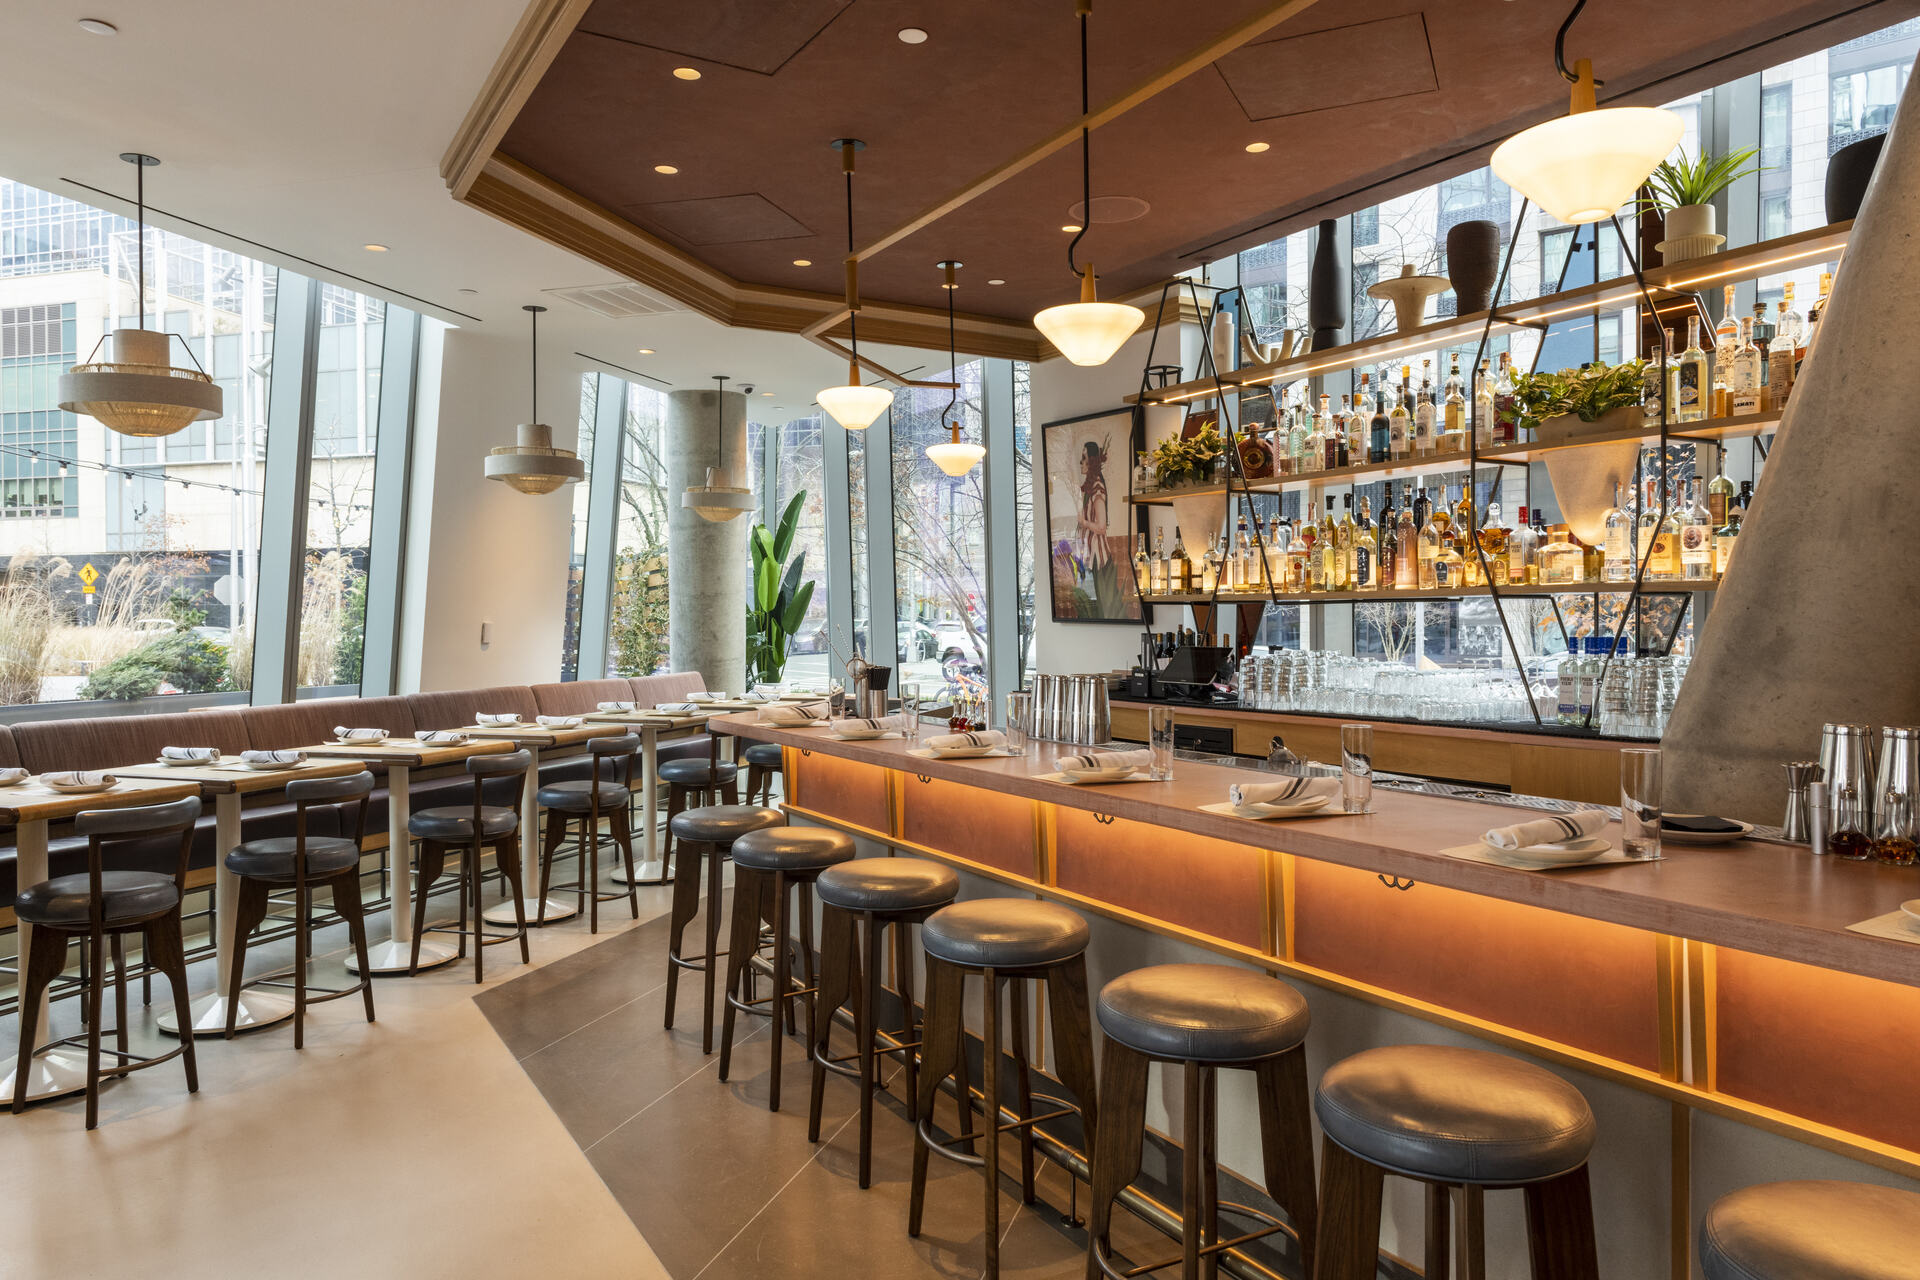 Modern and sophisticated restaurant interior with a stylish bar area, elegant dining tables, and pendant lighting, creating an inviting atmosphere for a fine dining experience.